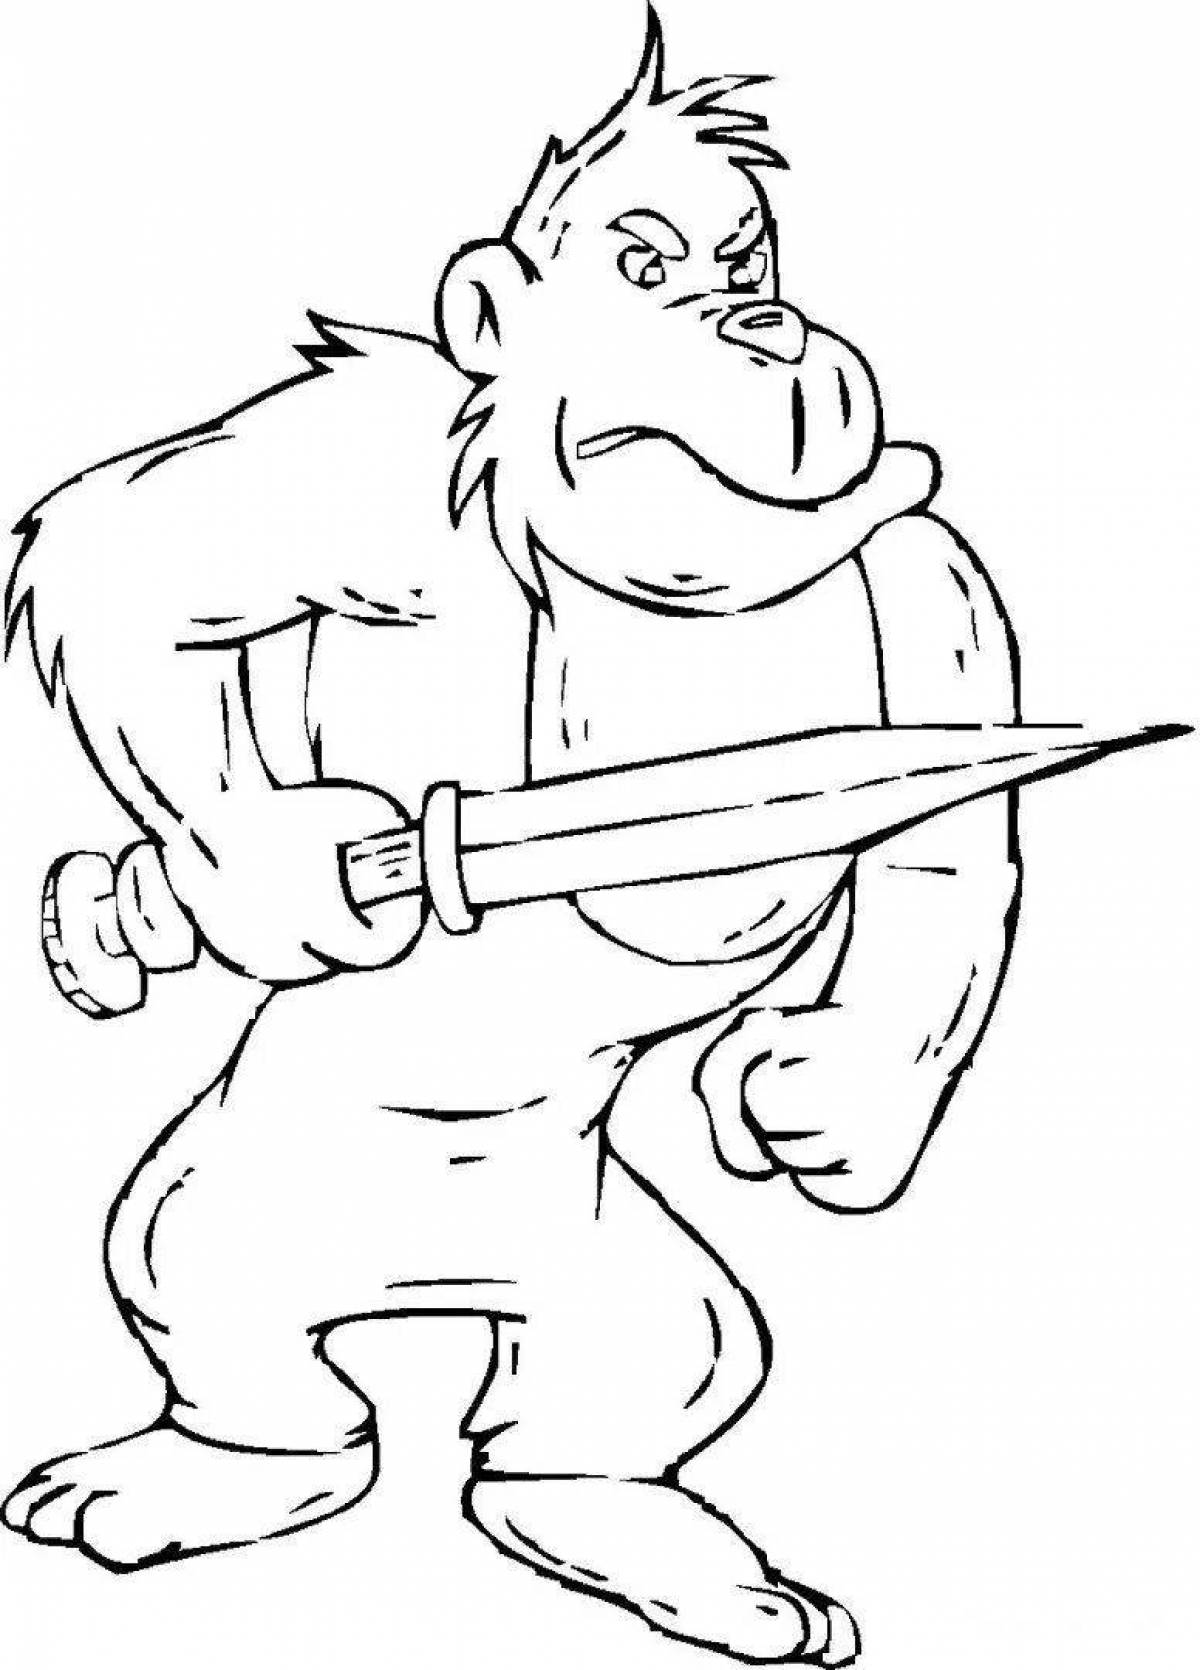 Outstanding gorilla coloring page for kids